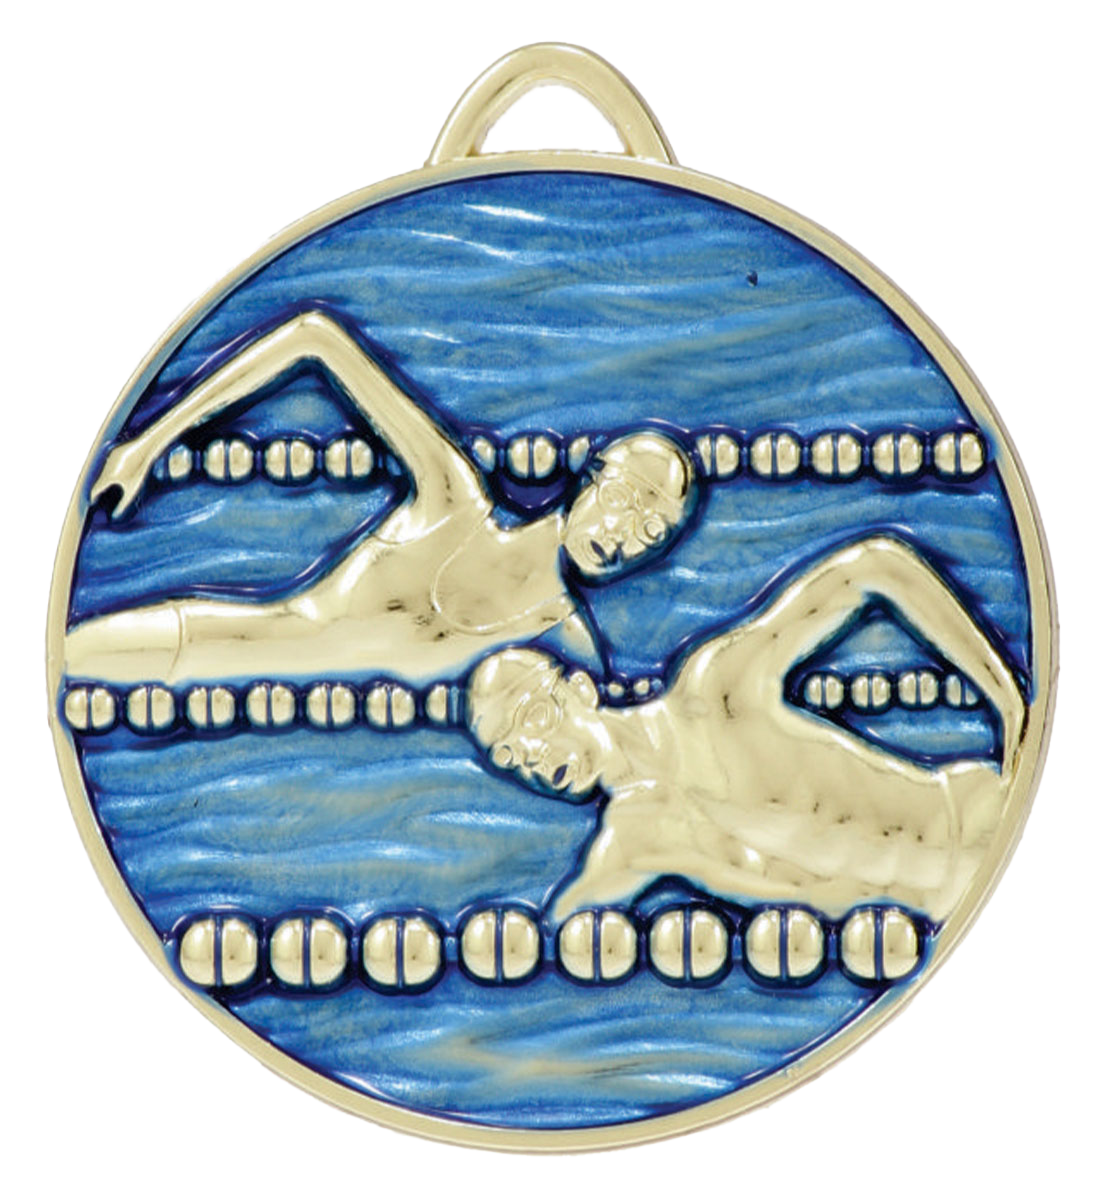 Painted Swimming Medal - No Insert